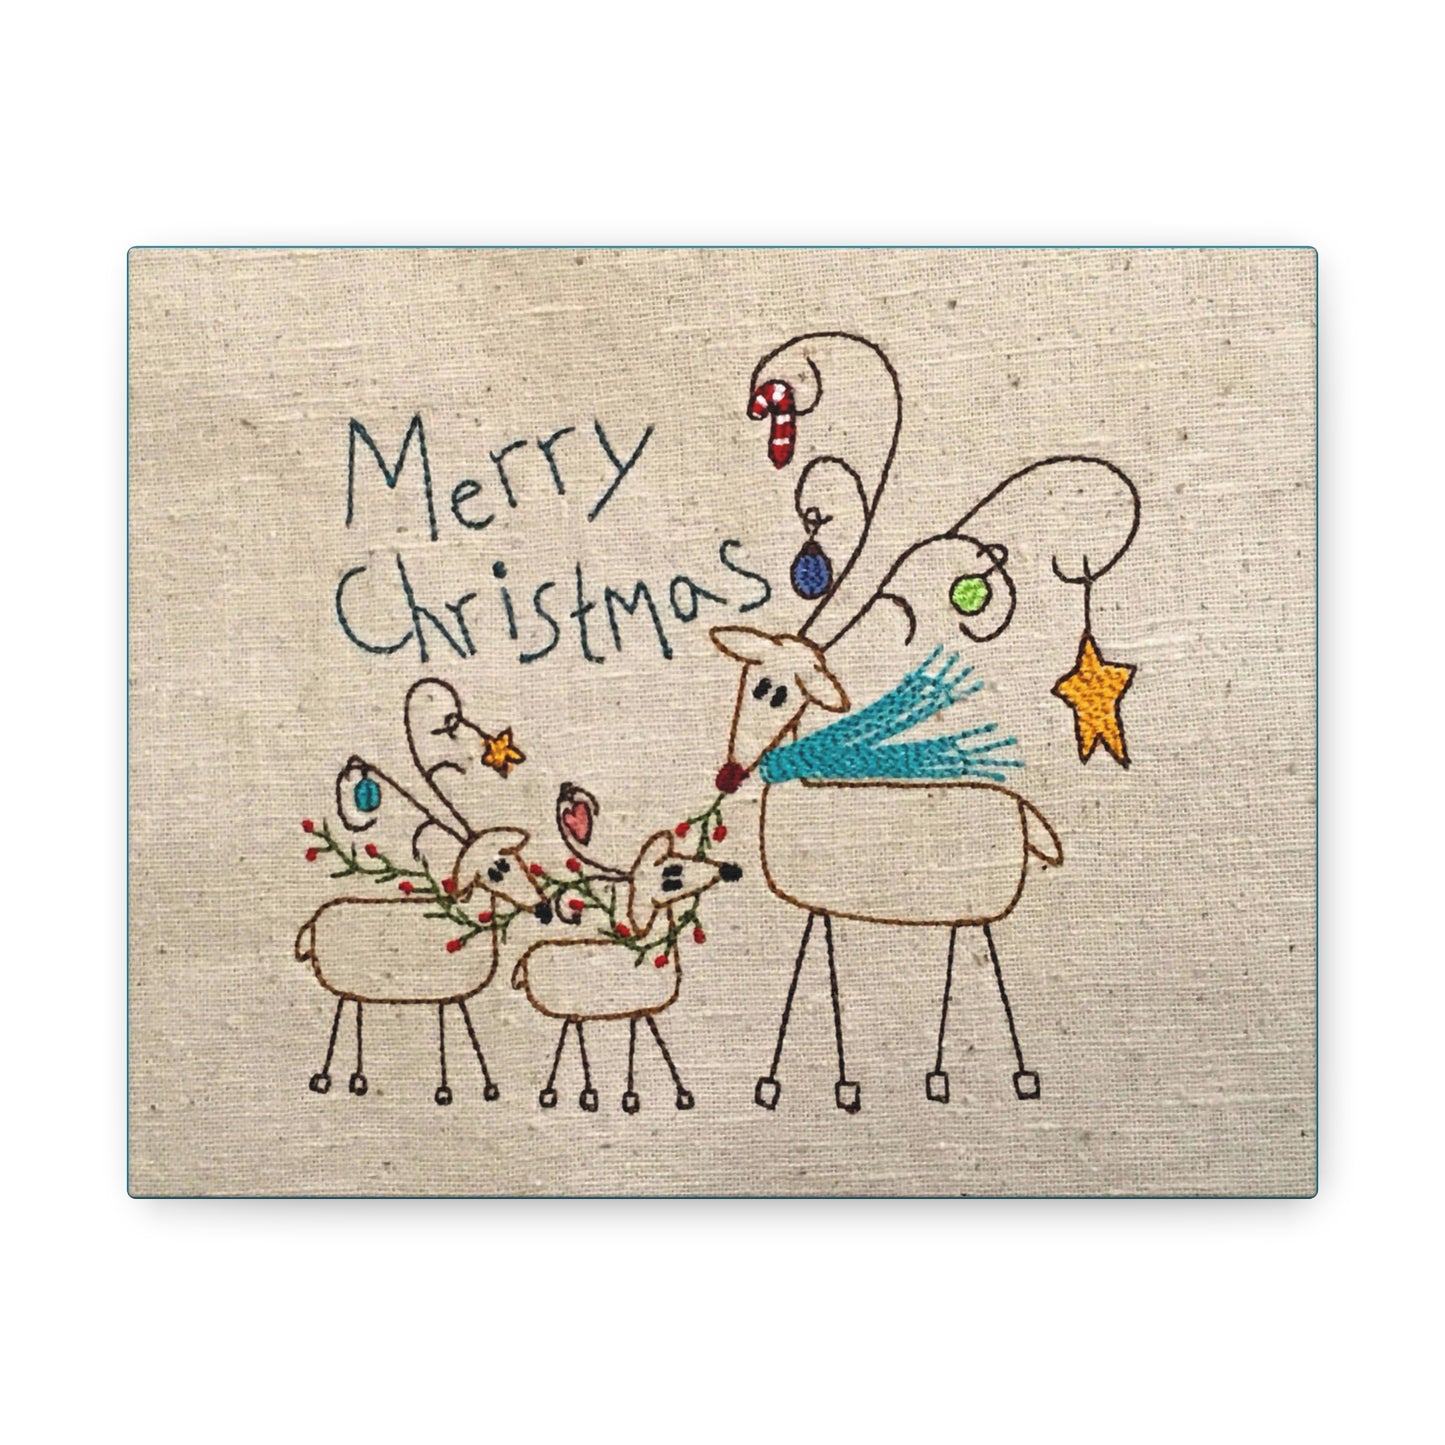 Rudy Merry Christmas Canvas Gallery Wraps